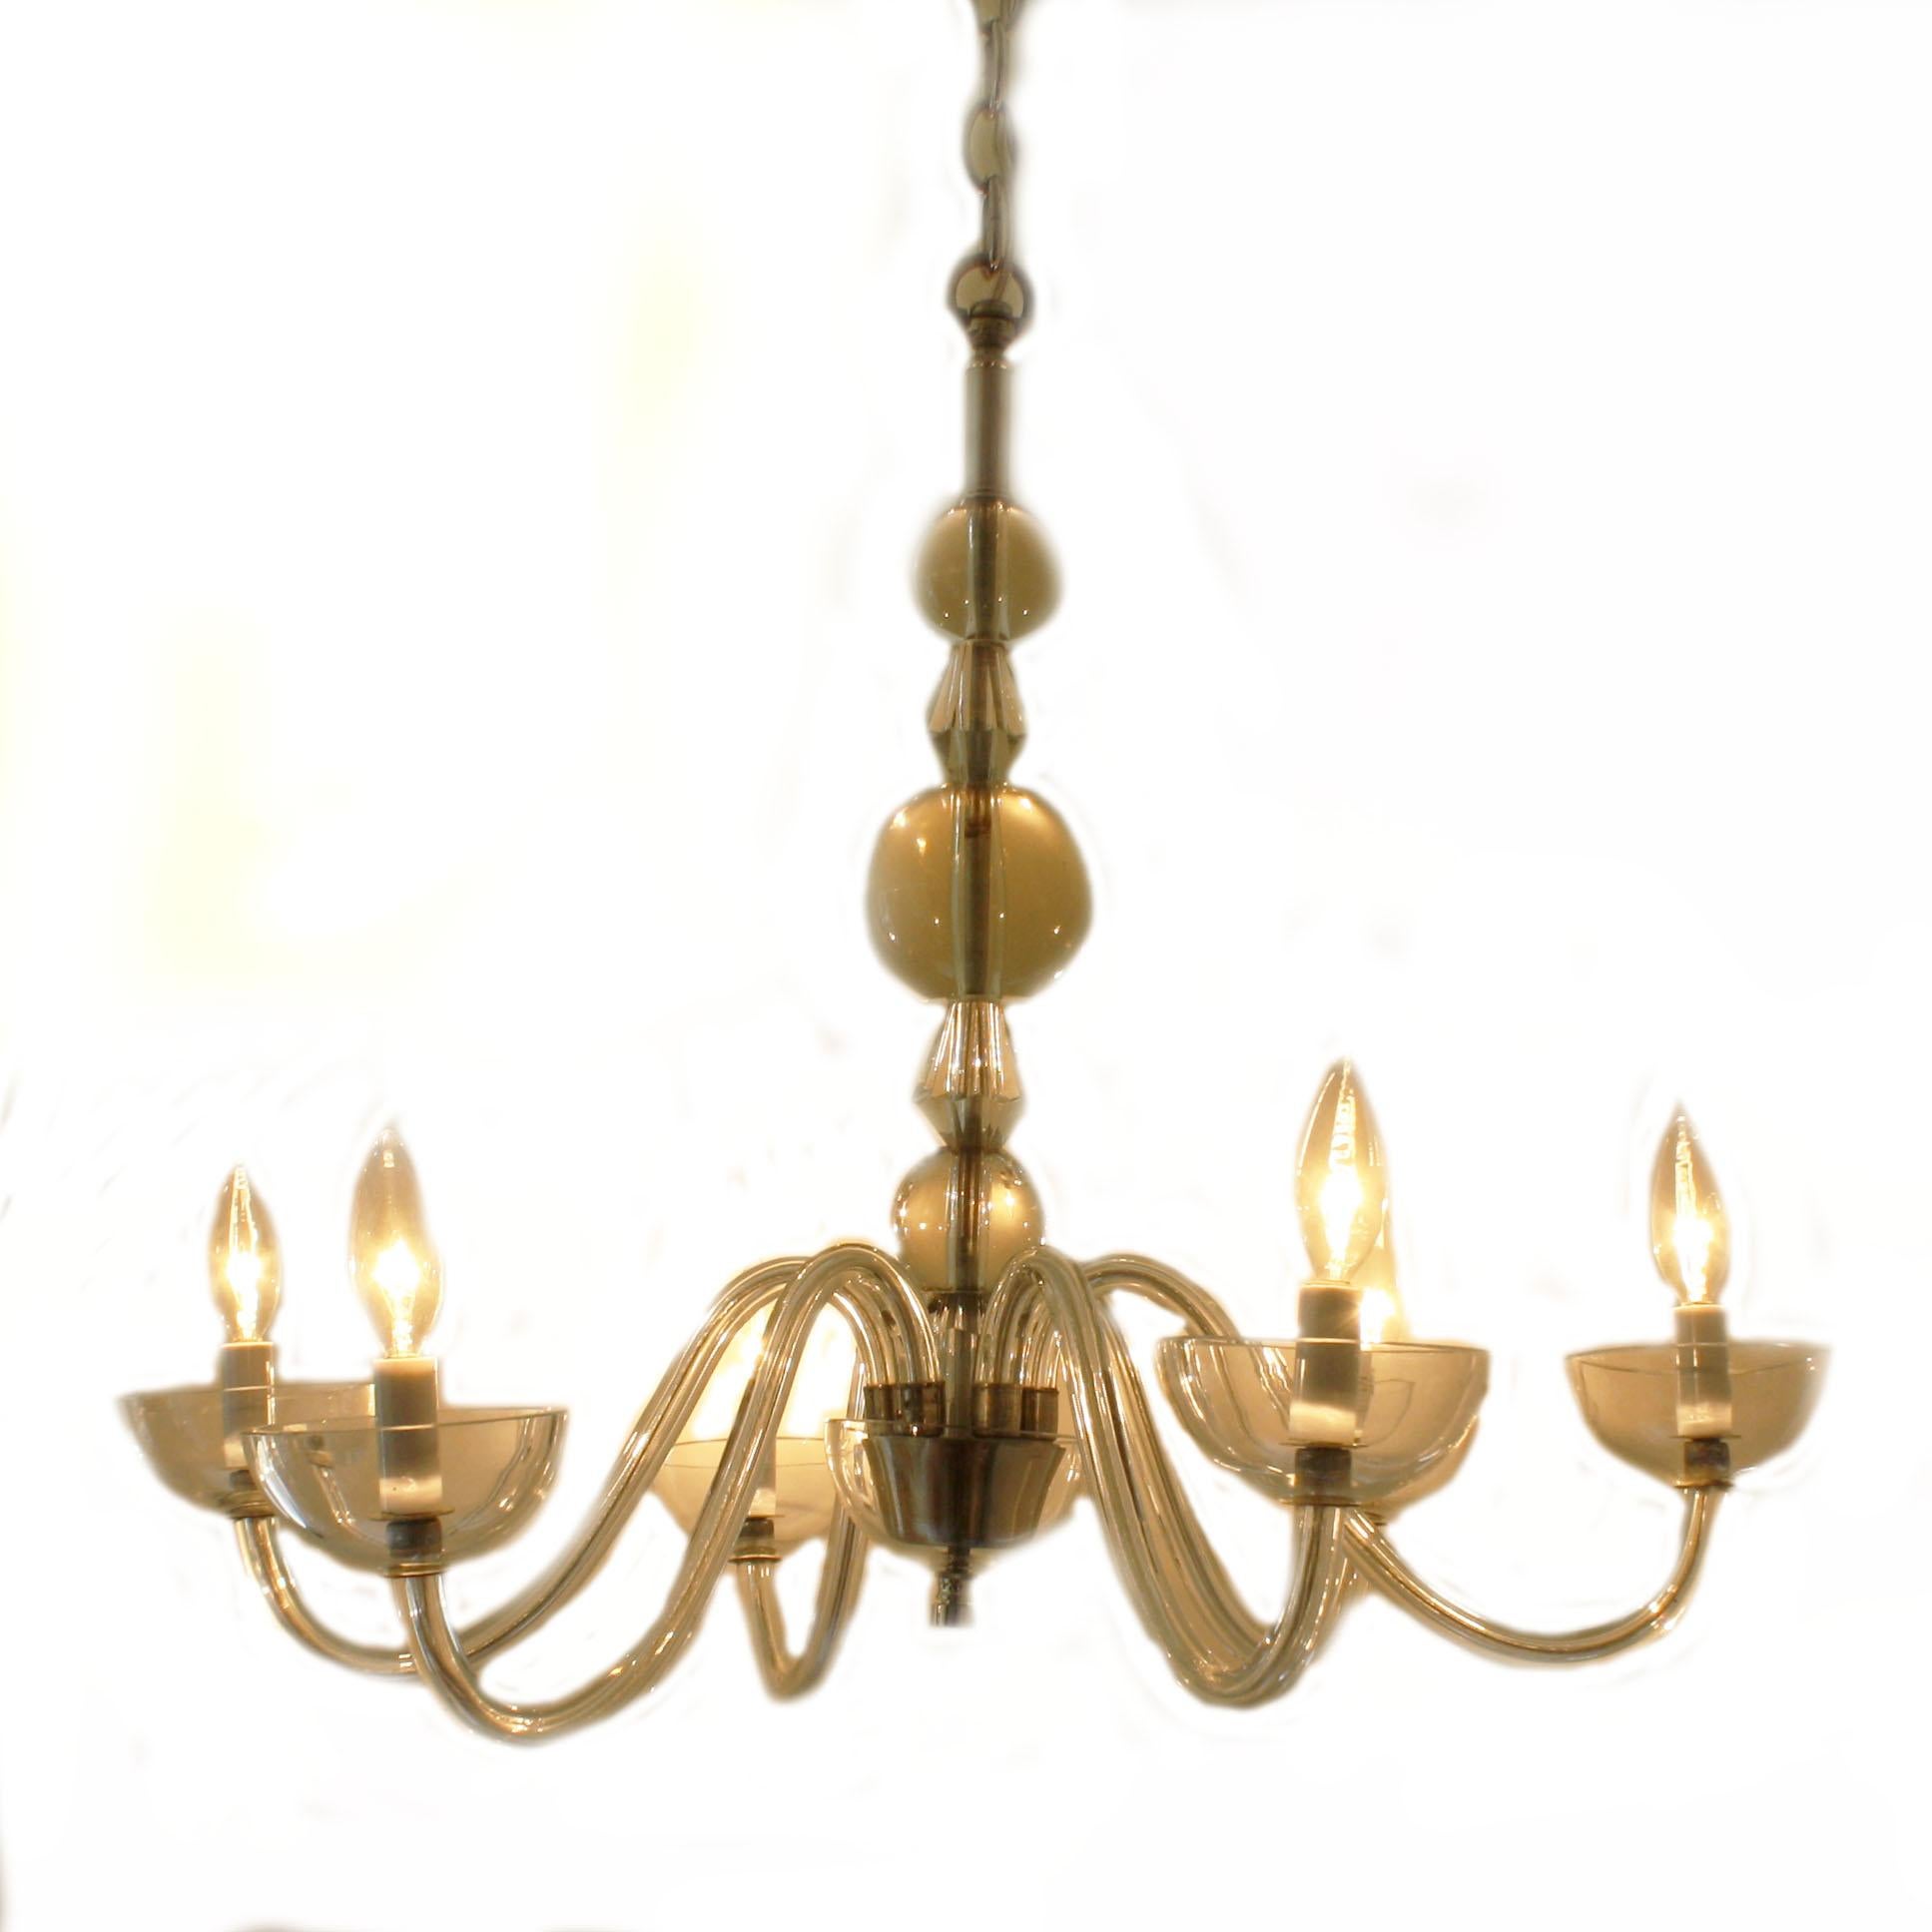 Glass French Chandelier in the Style of Jacques Adnet, circa 1940